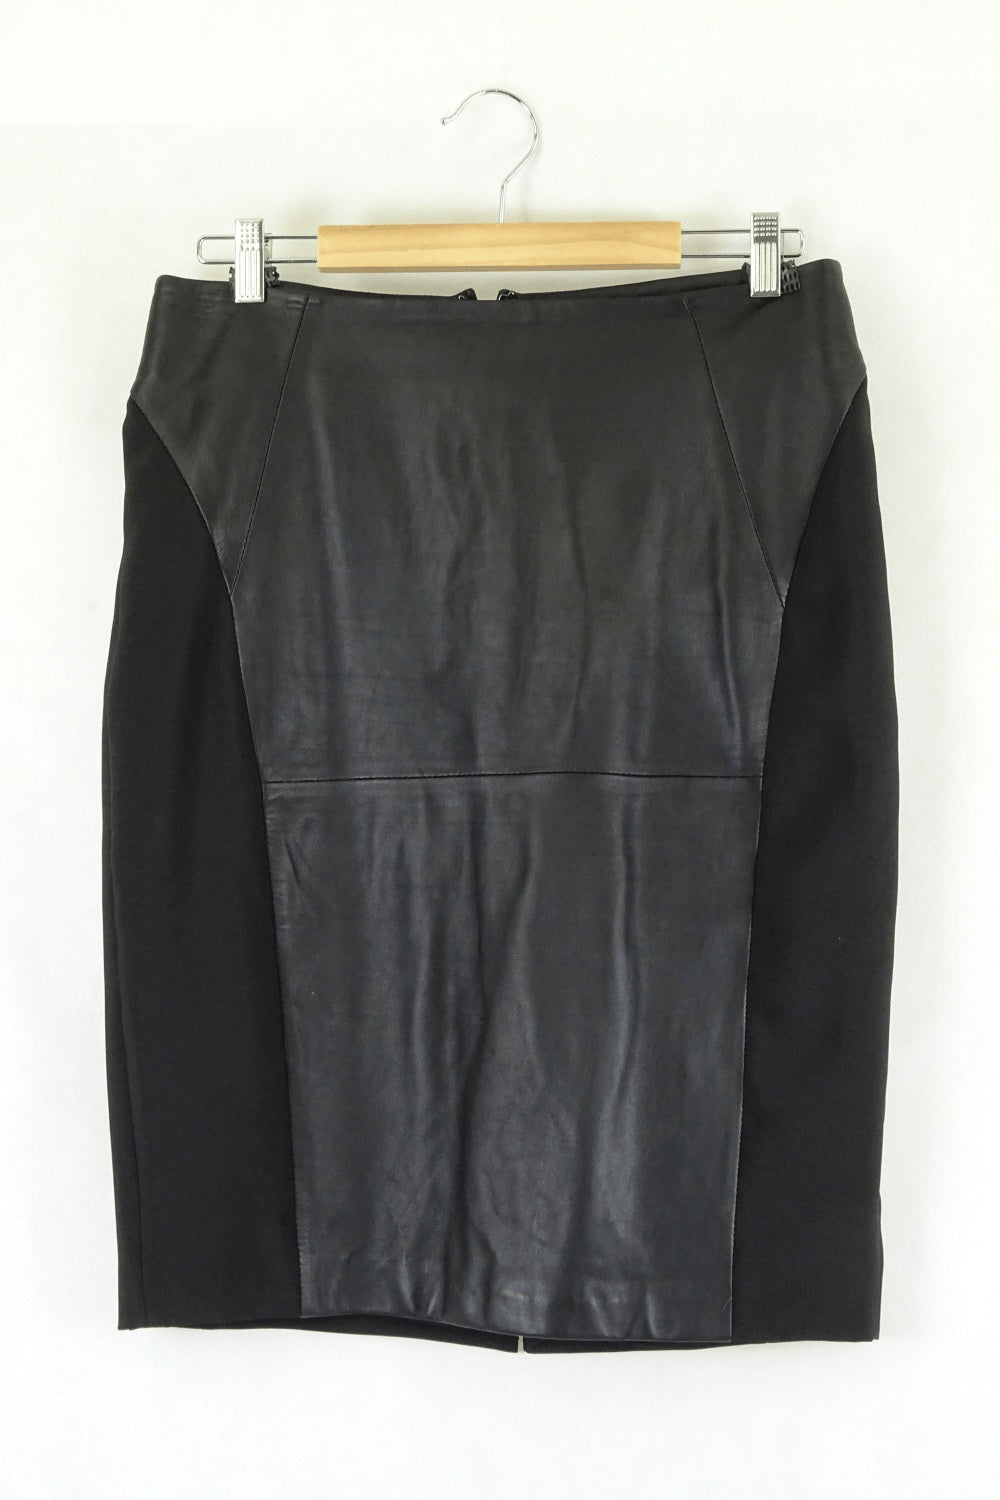 REISS Black Faux Leather Skirt 12